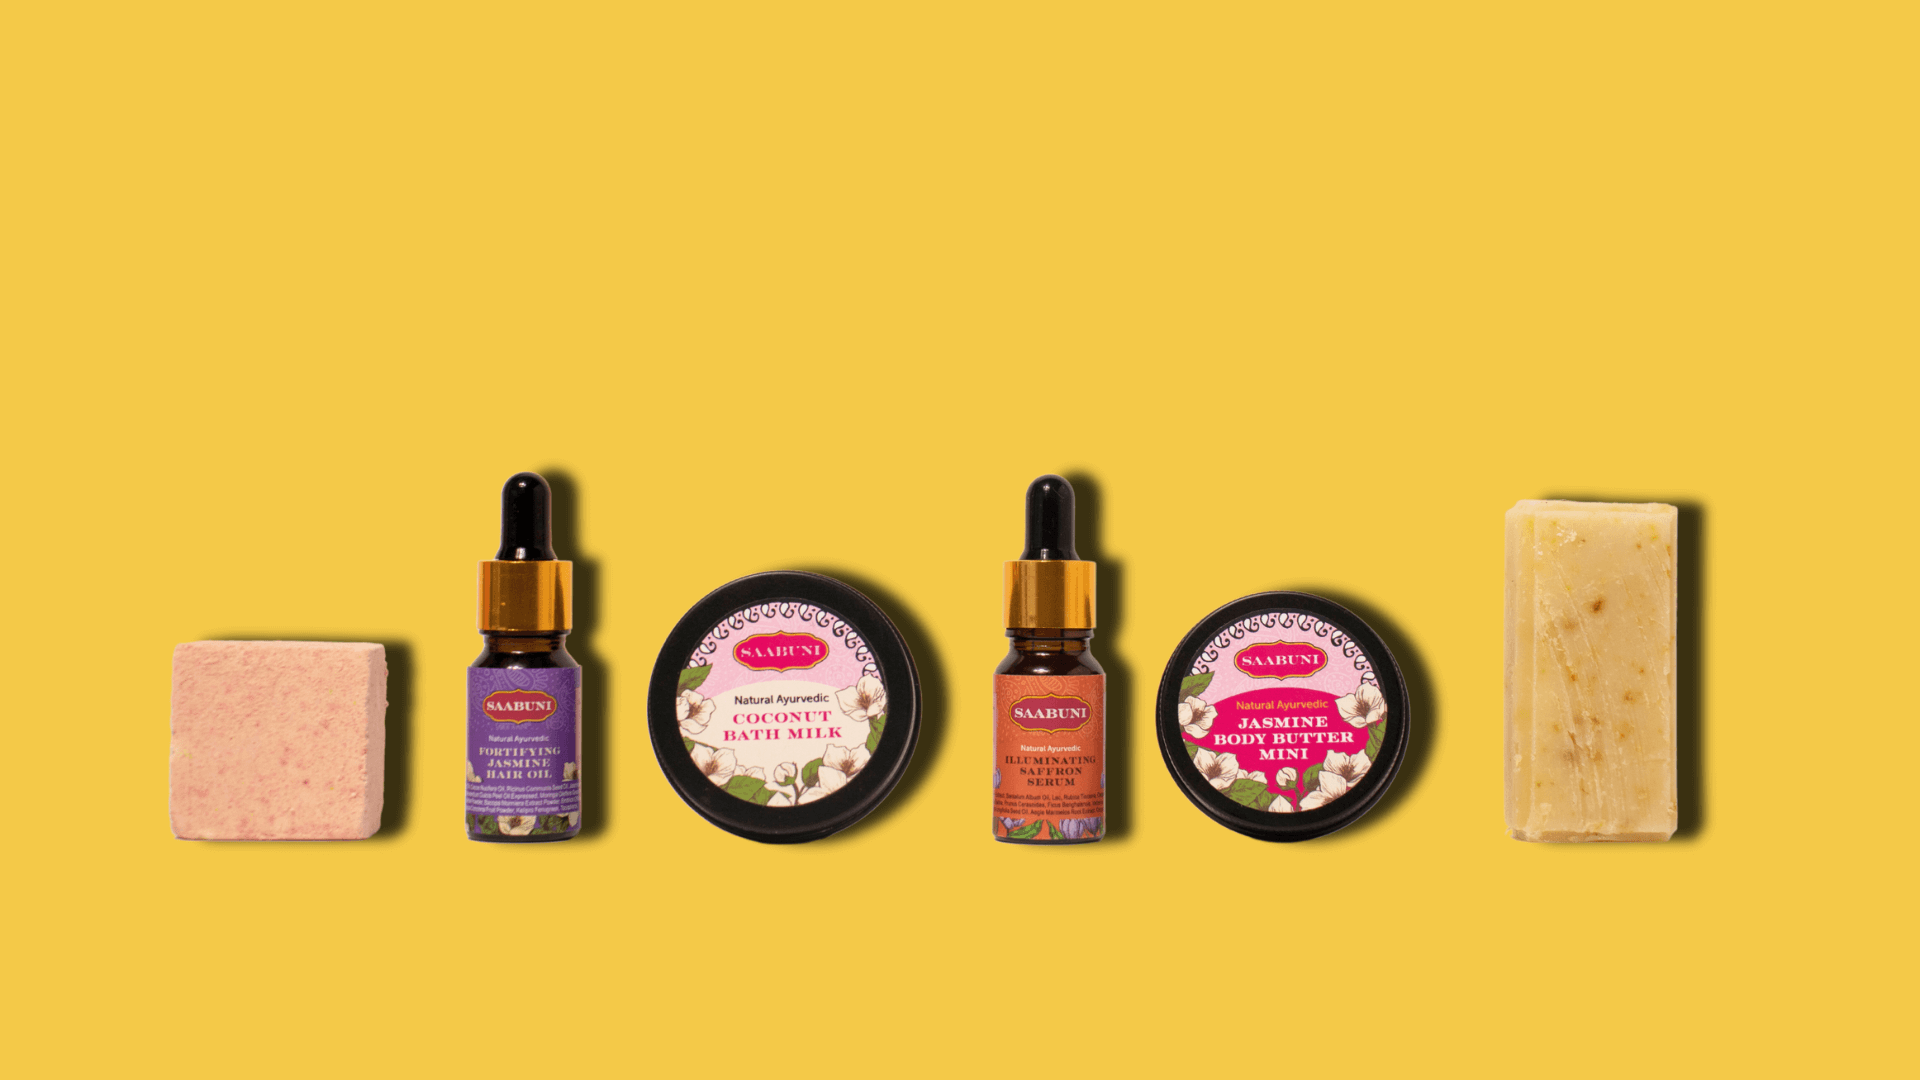 Mini beauty ayurvedic discovery set now available